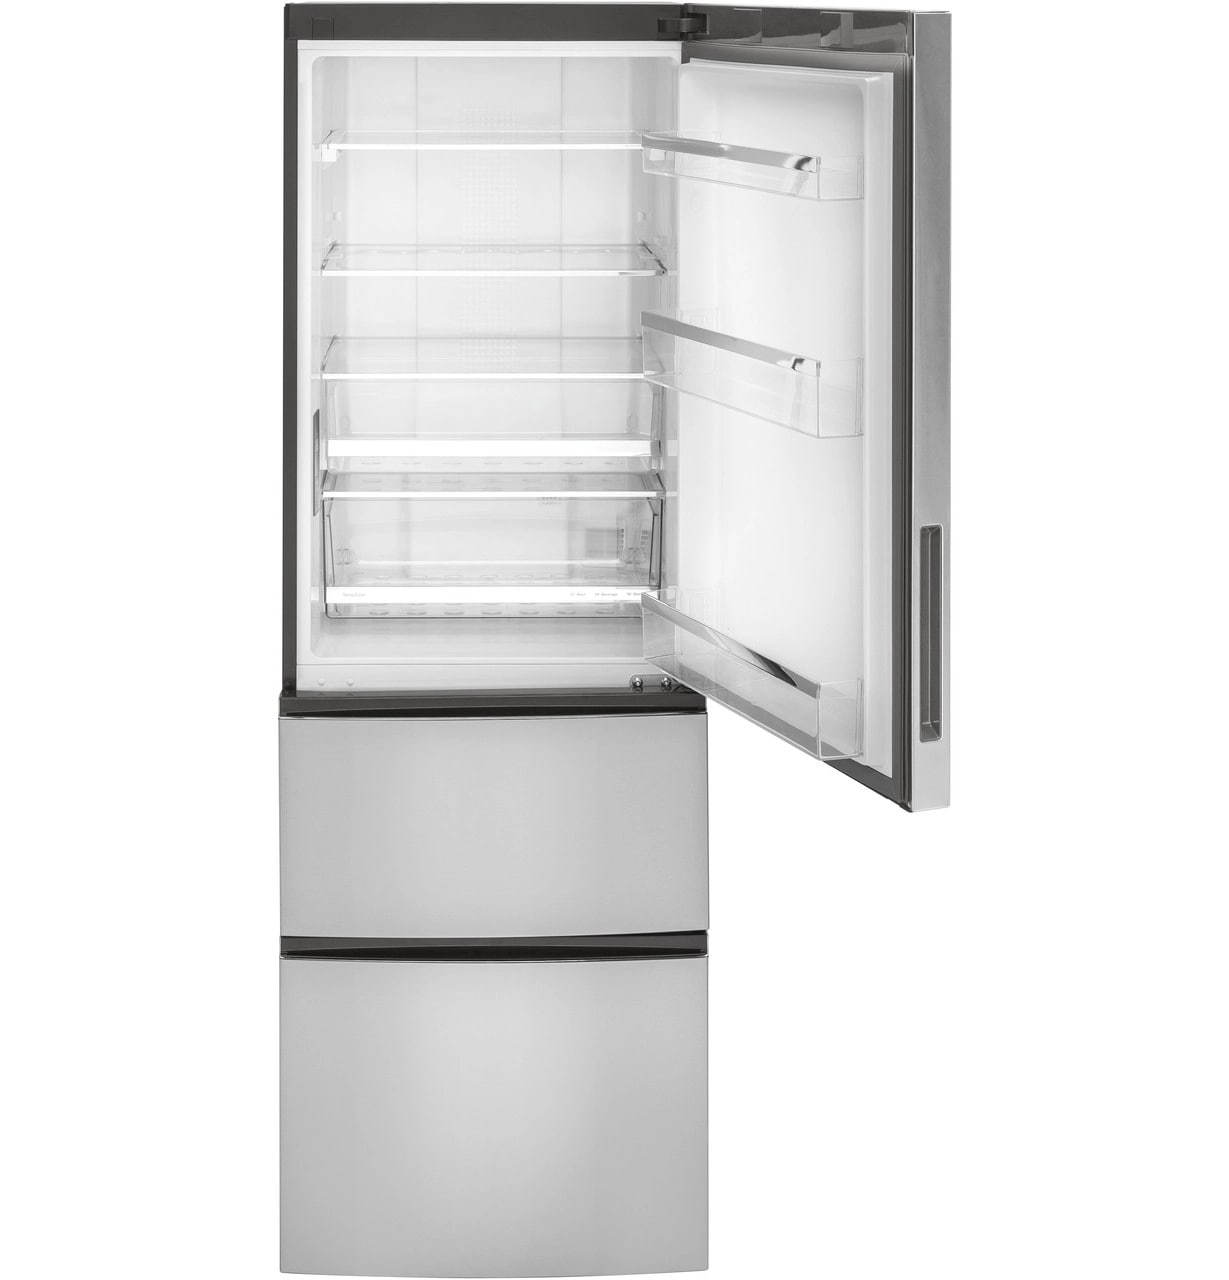 GE - 23.5 Inch 11.9 cu. ft Bottom Mount Refrigerator in Stainless - GLE12HSPSS